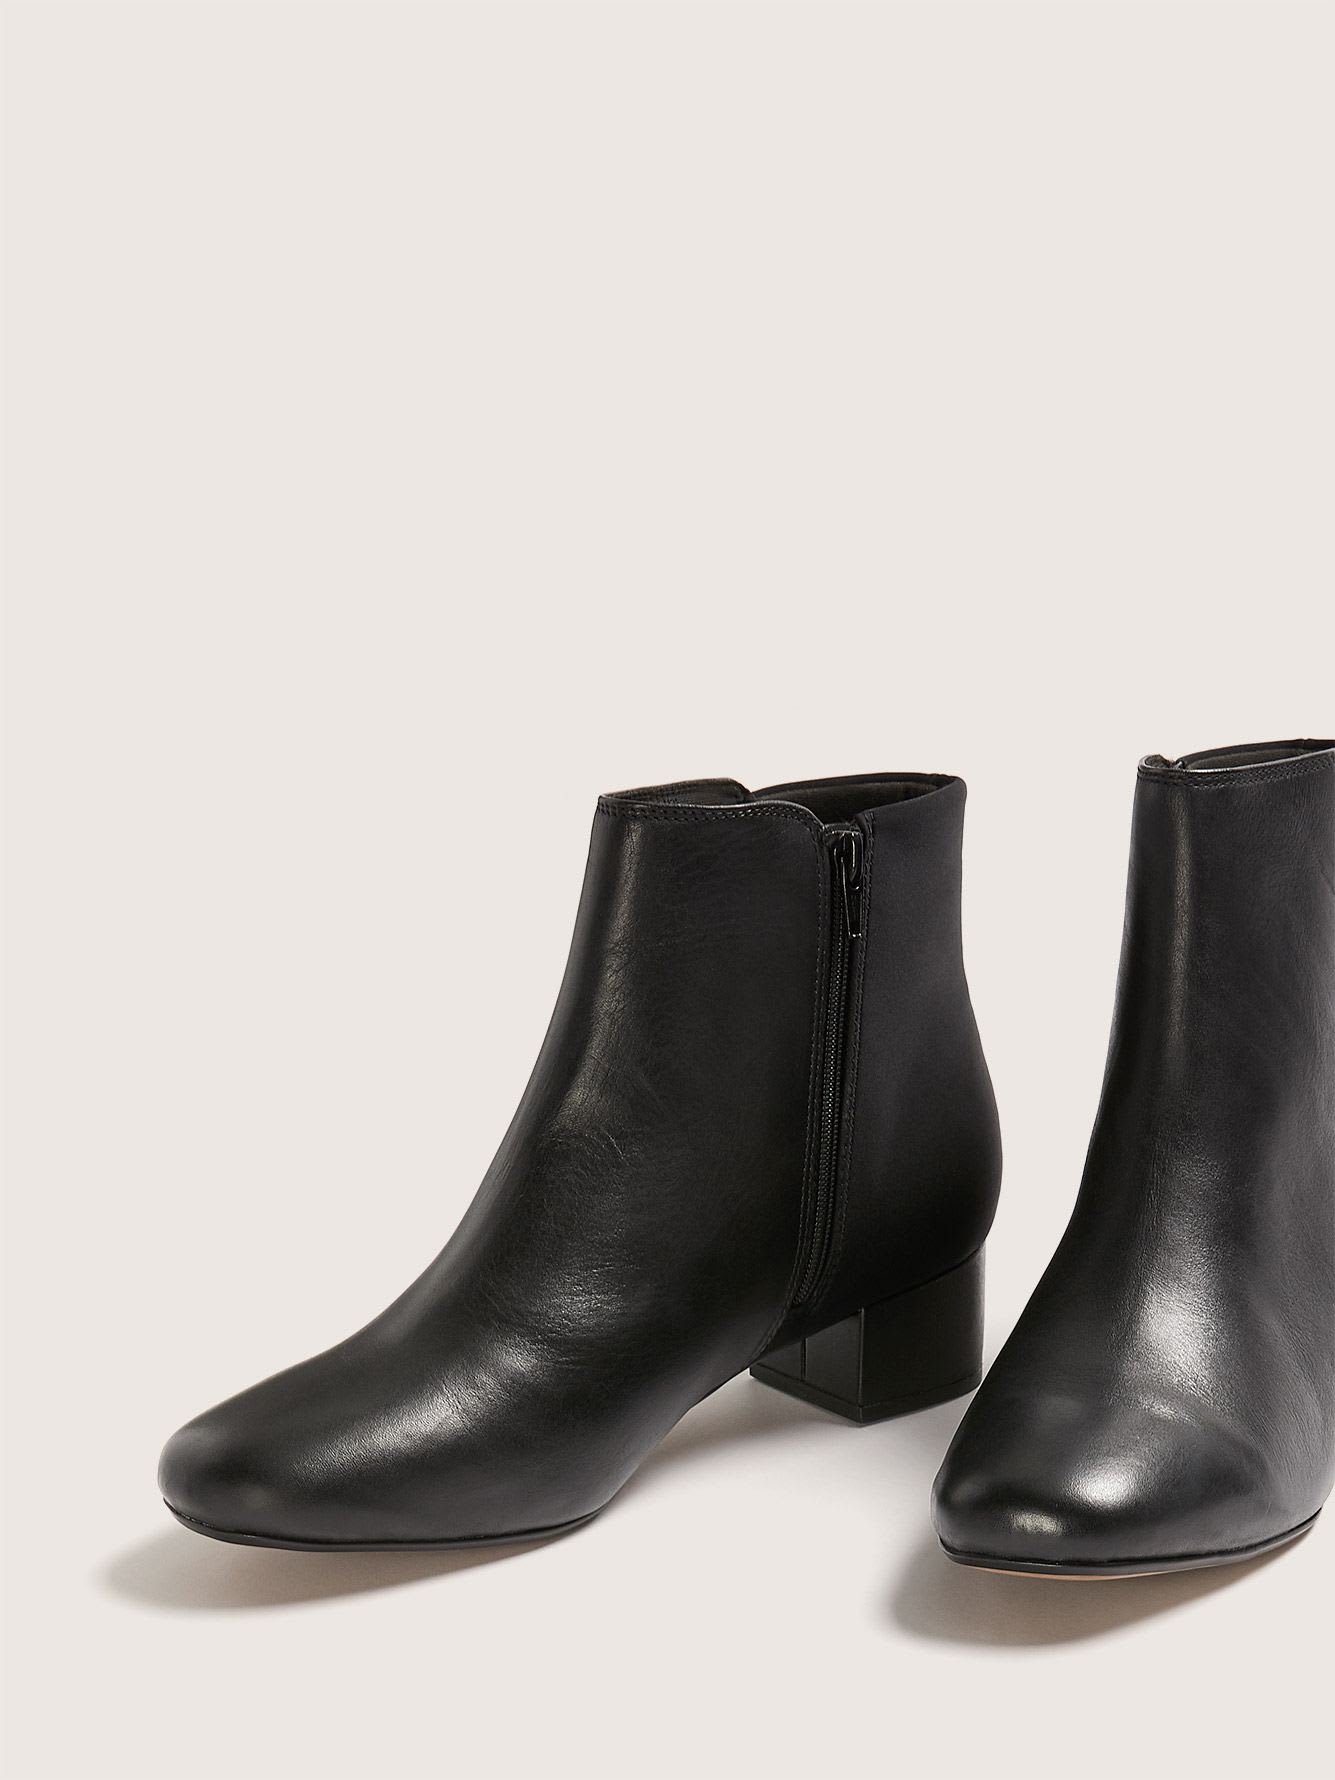 clarks leather side zip ankle boots